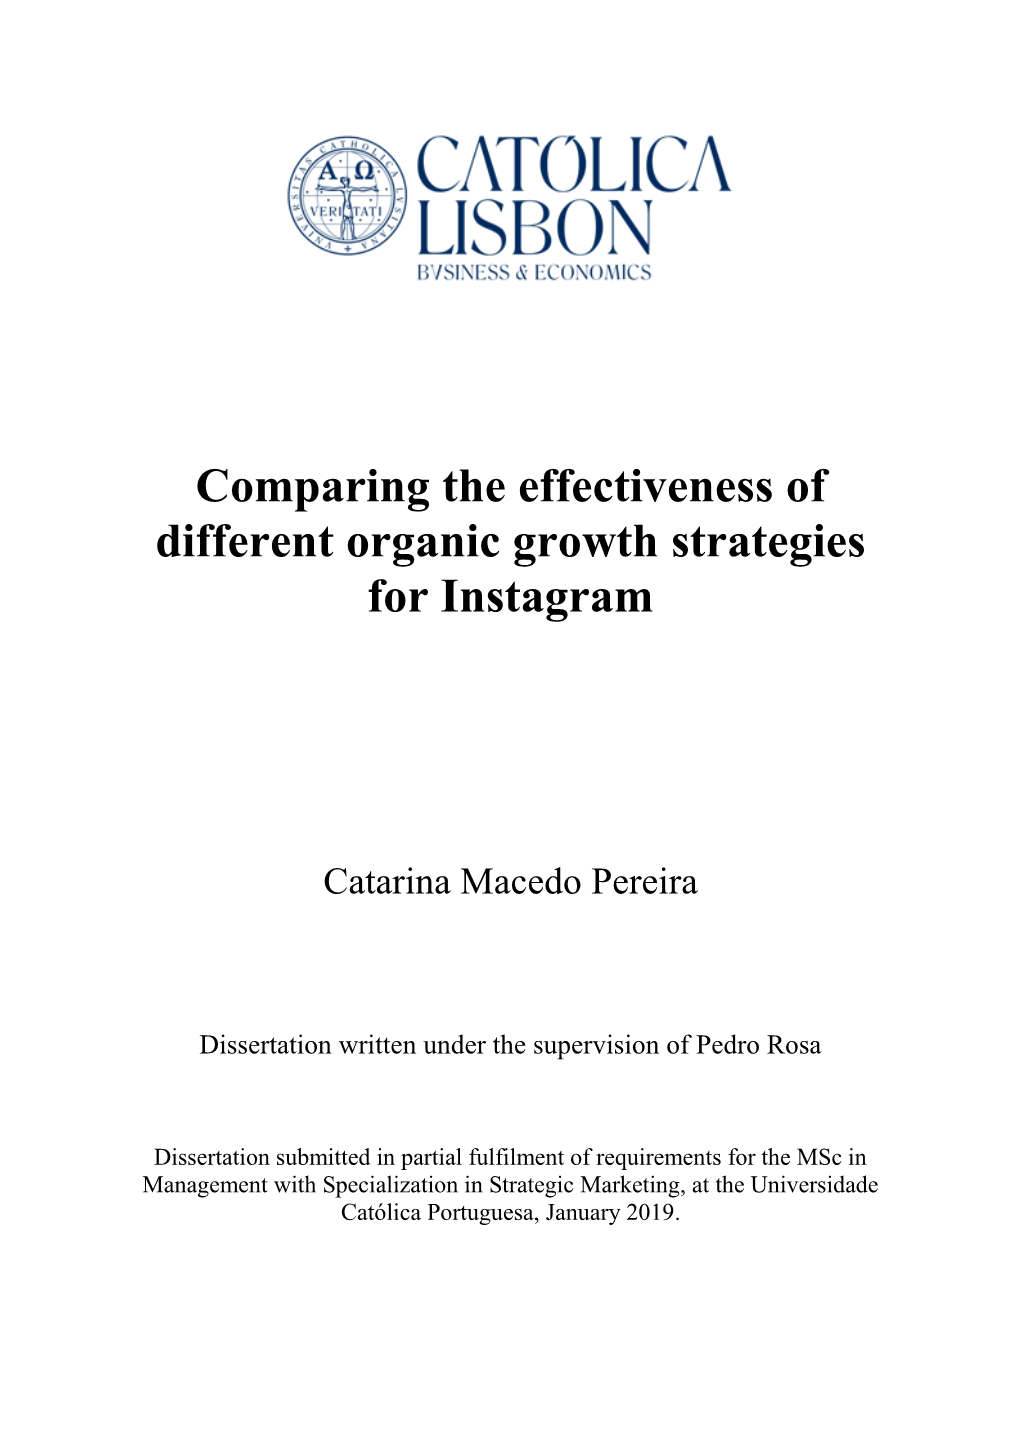 Comparing the Effectiveness of Different Organic Growth Strategies for Instagram